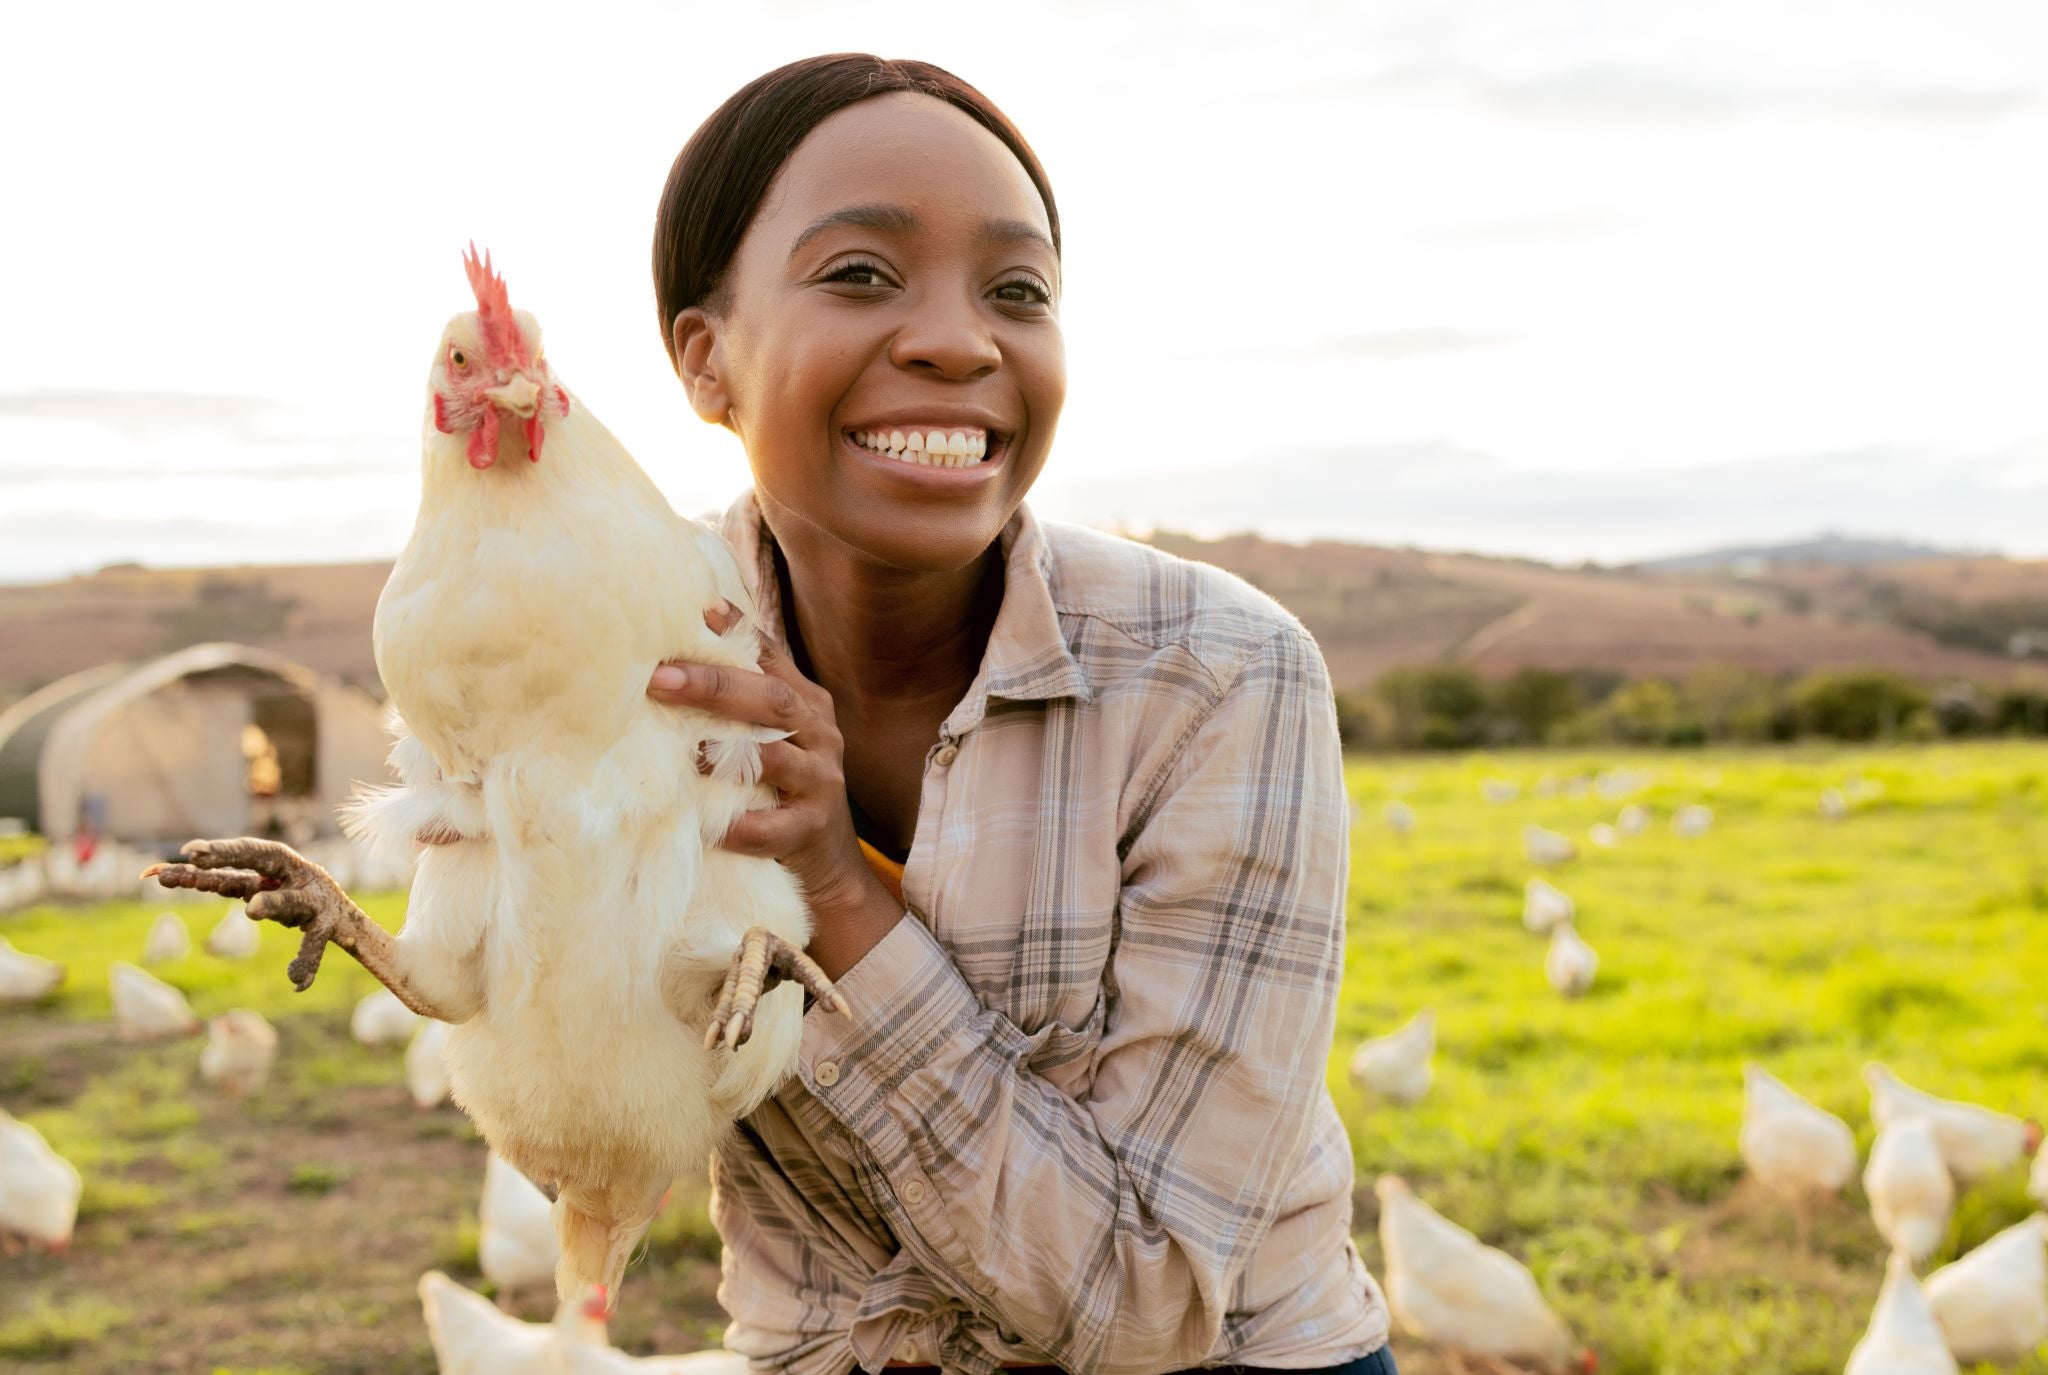 Smiling woman holding a white chicken.